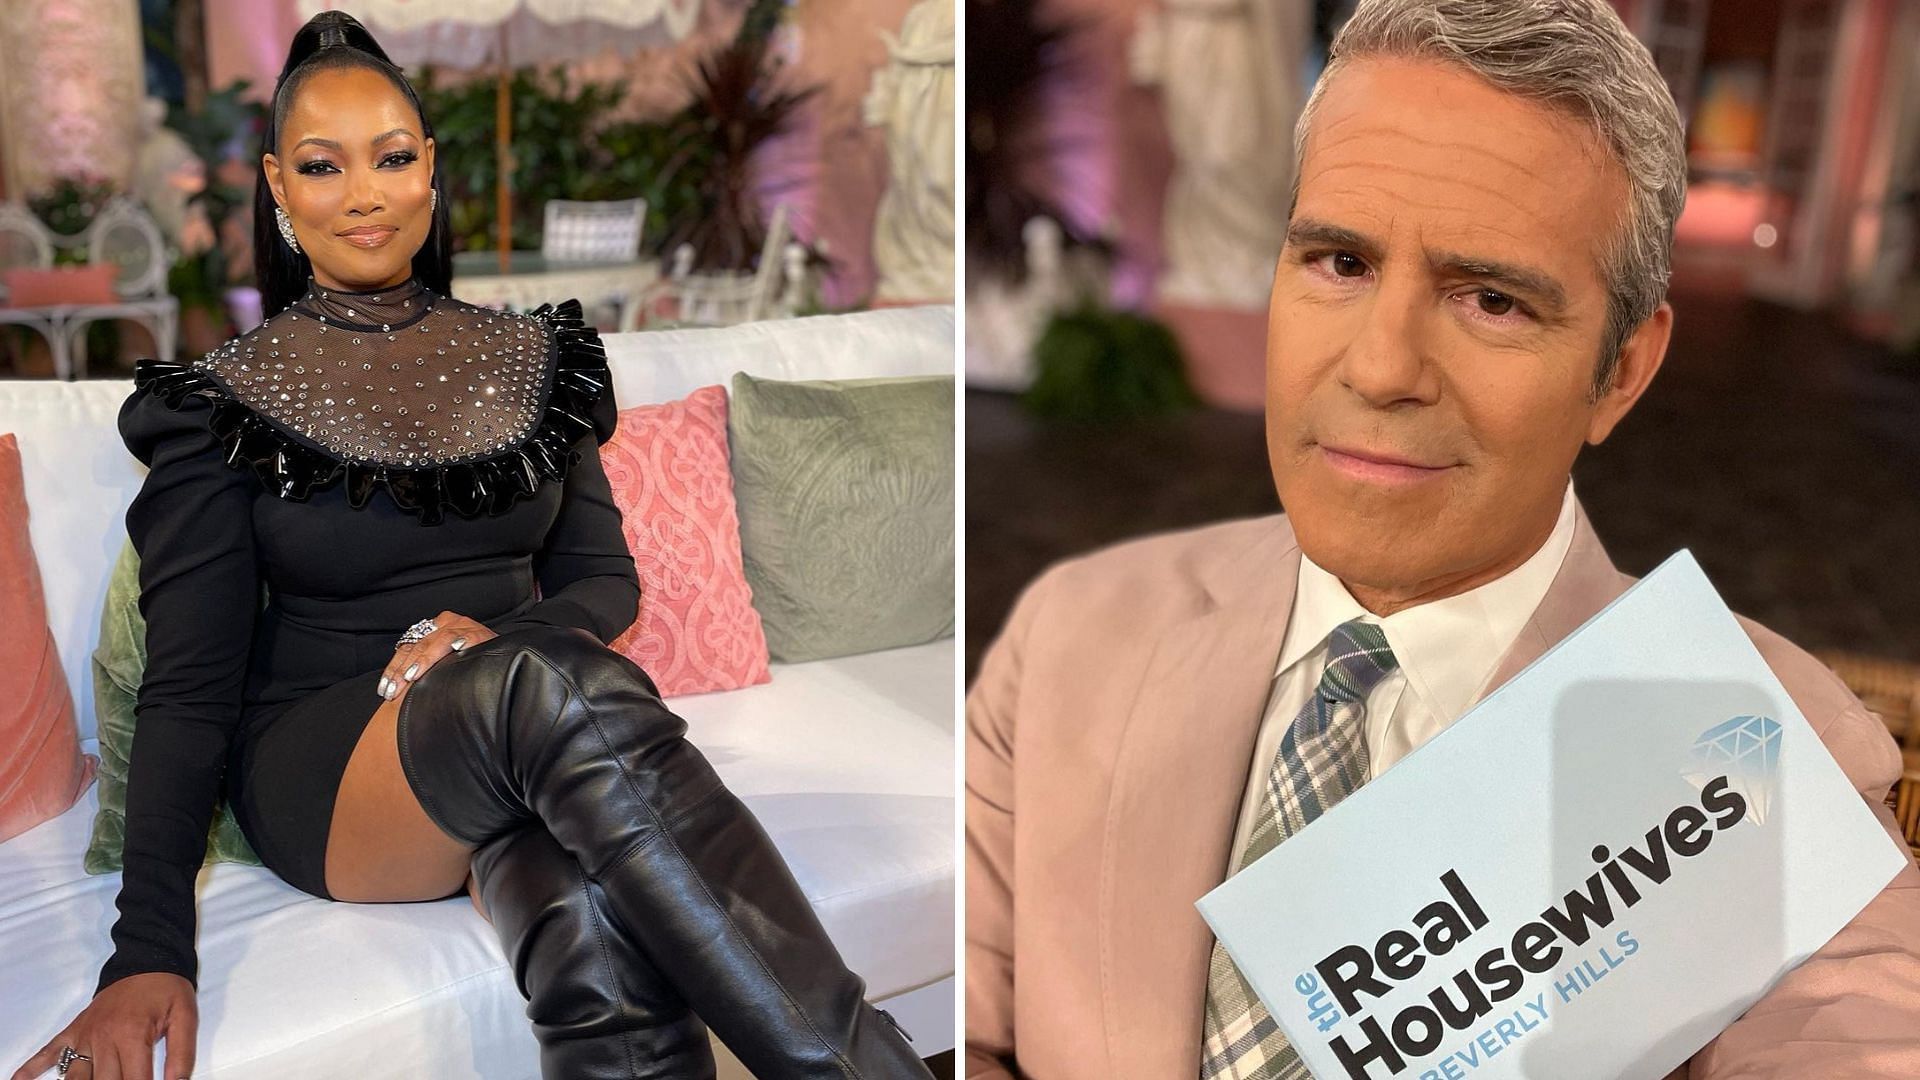 Andy Cohen apologizes to RHOBH star Garcelle